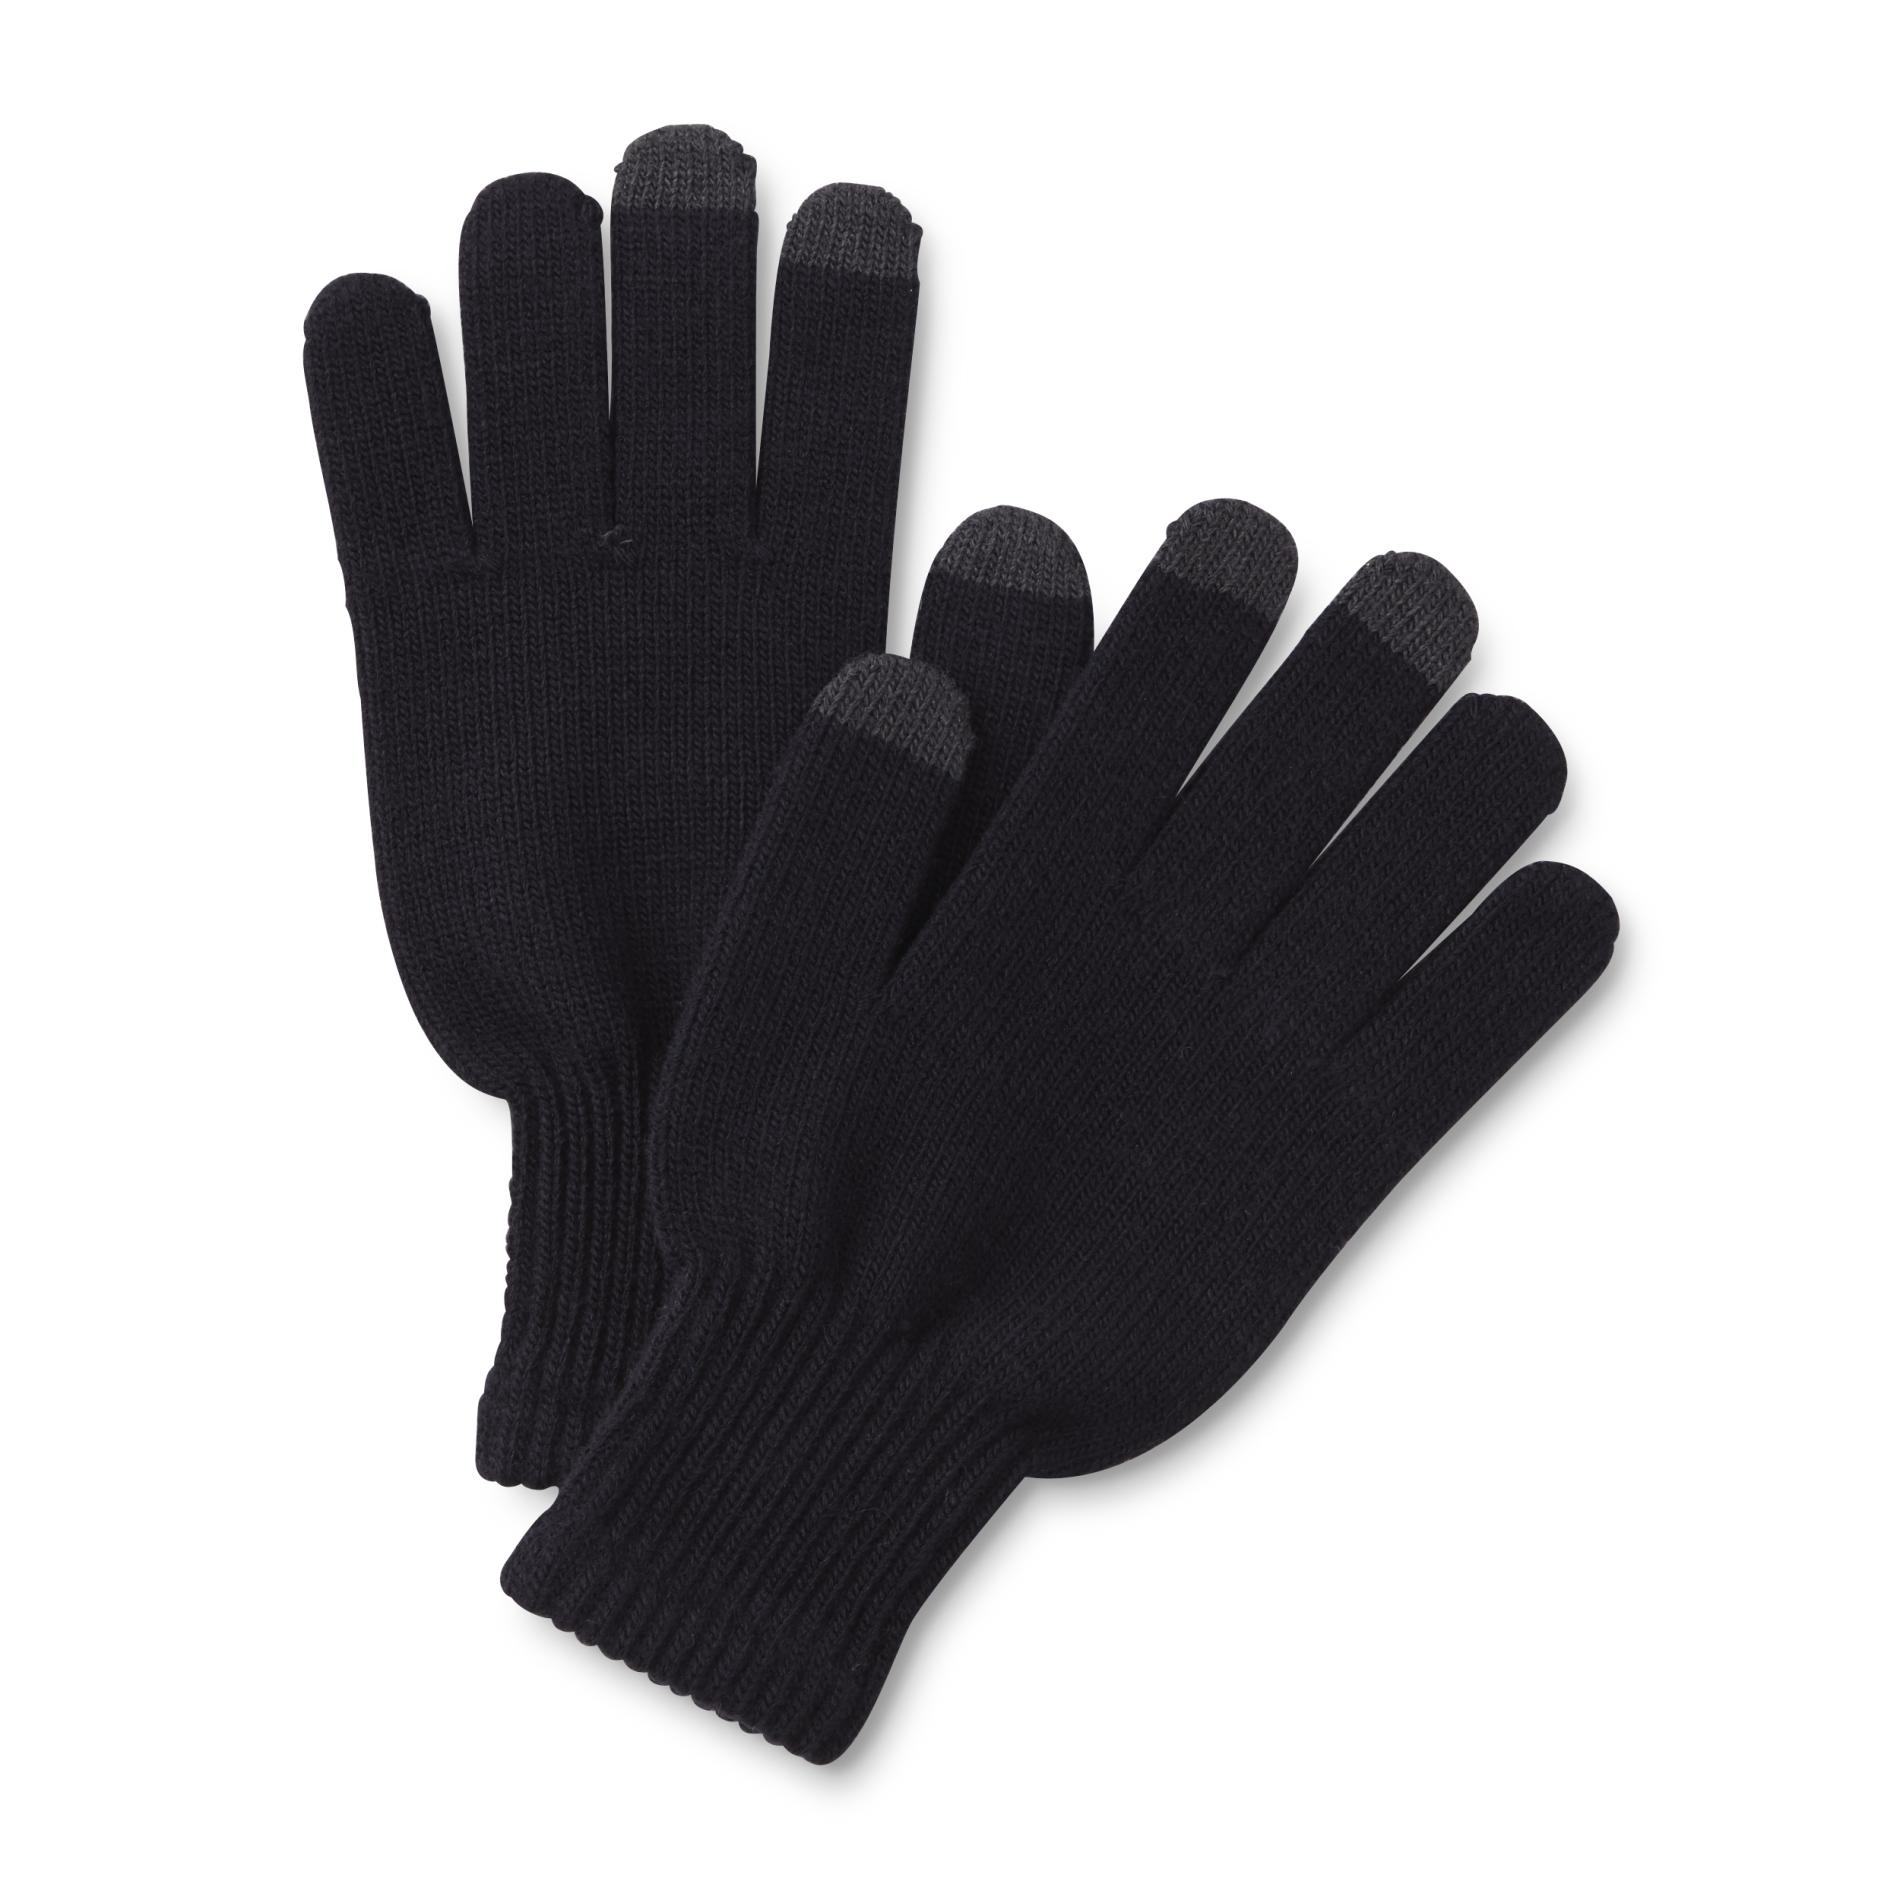 Simply Styled Men's Touch Tech Gloves